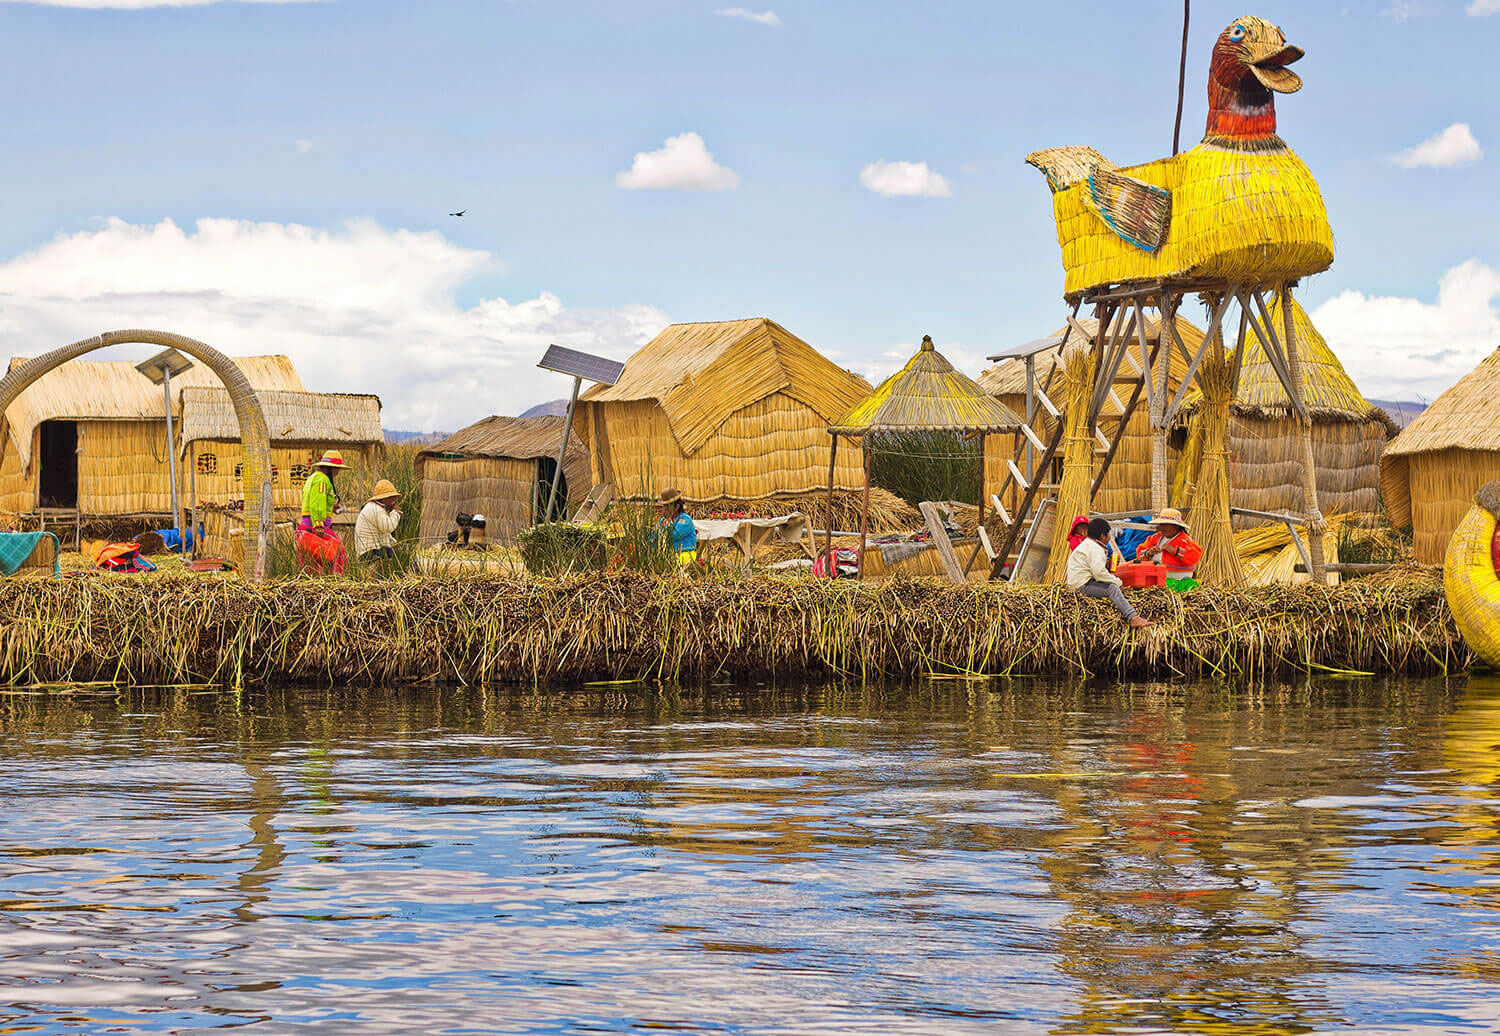 The floating Uros Islands located in Lake Titicaca